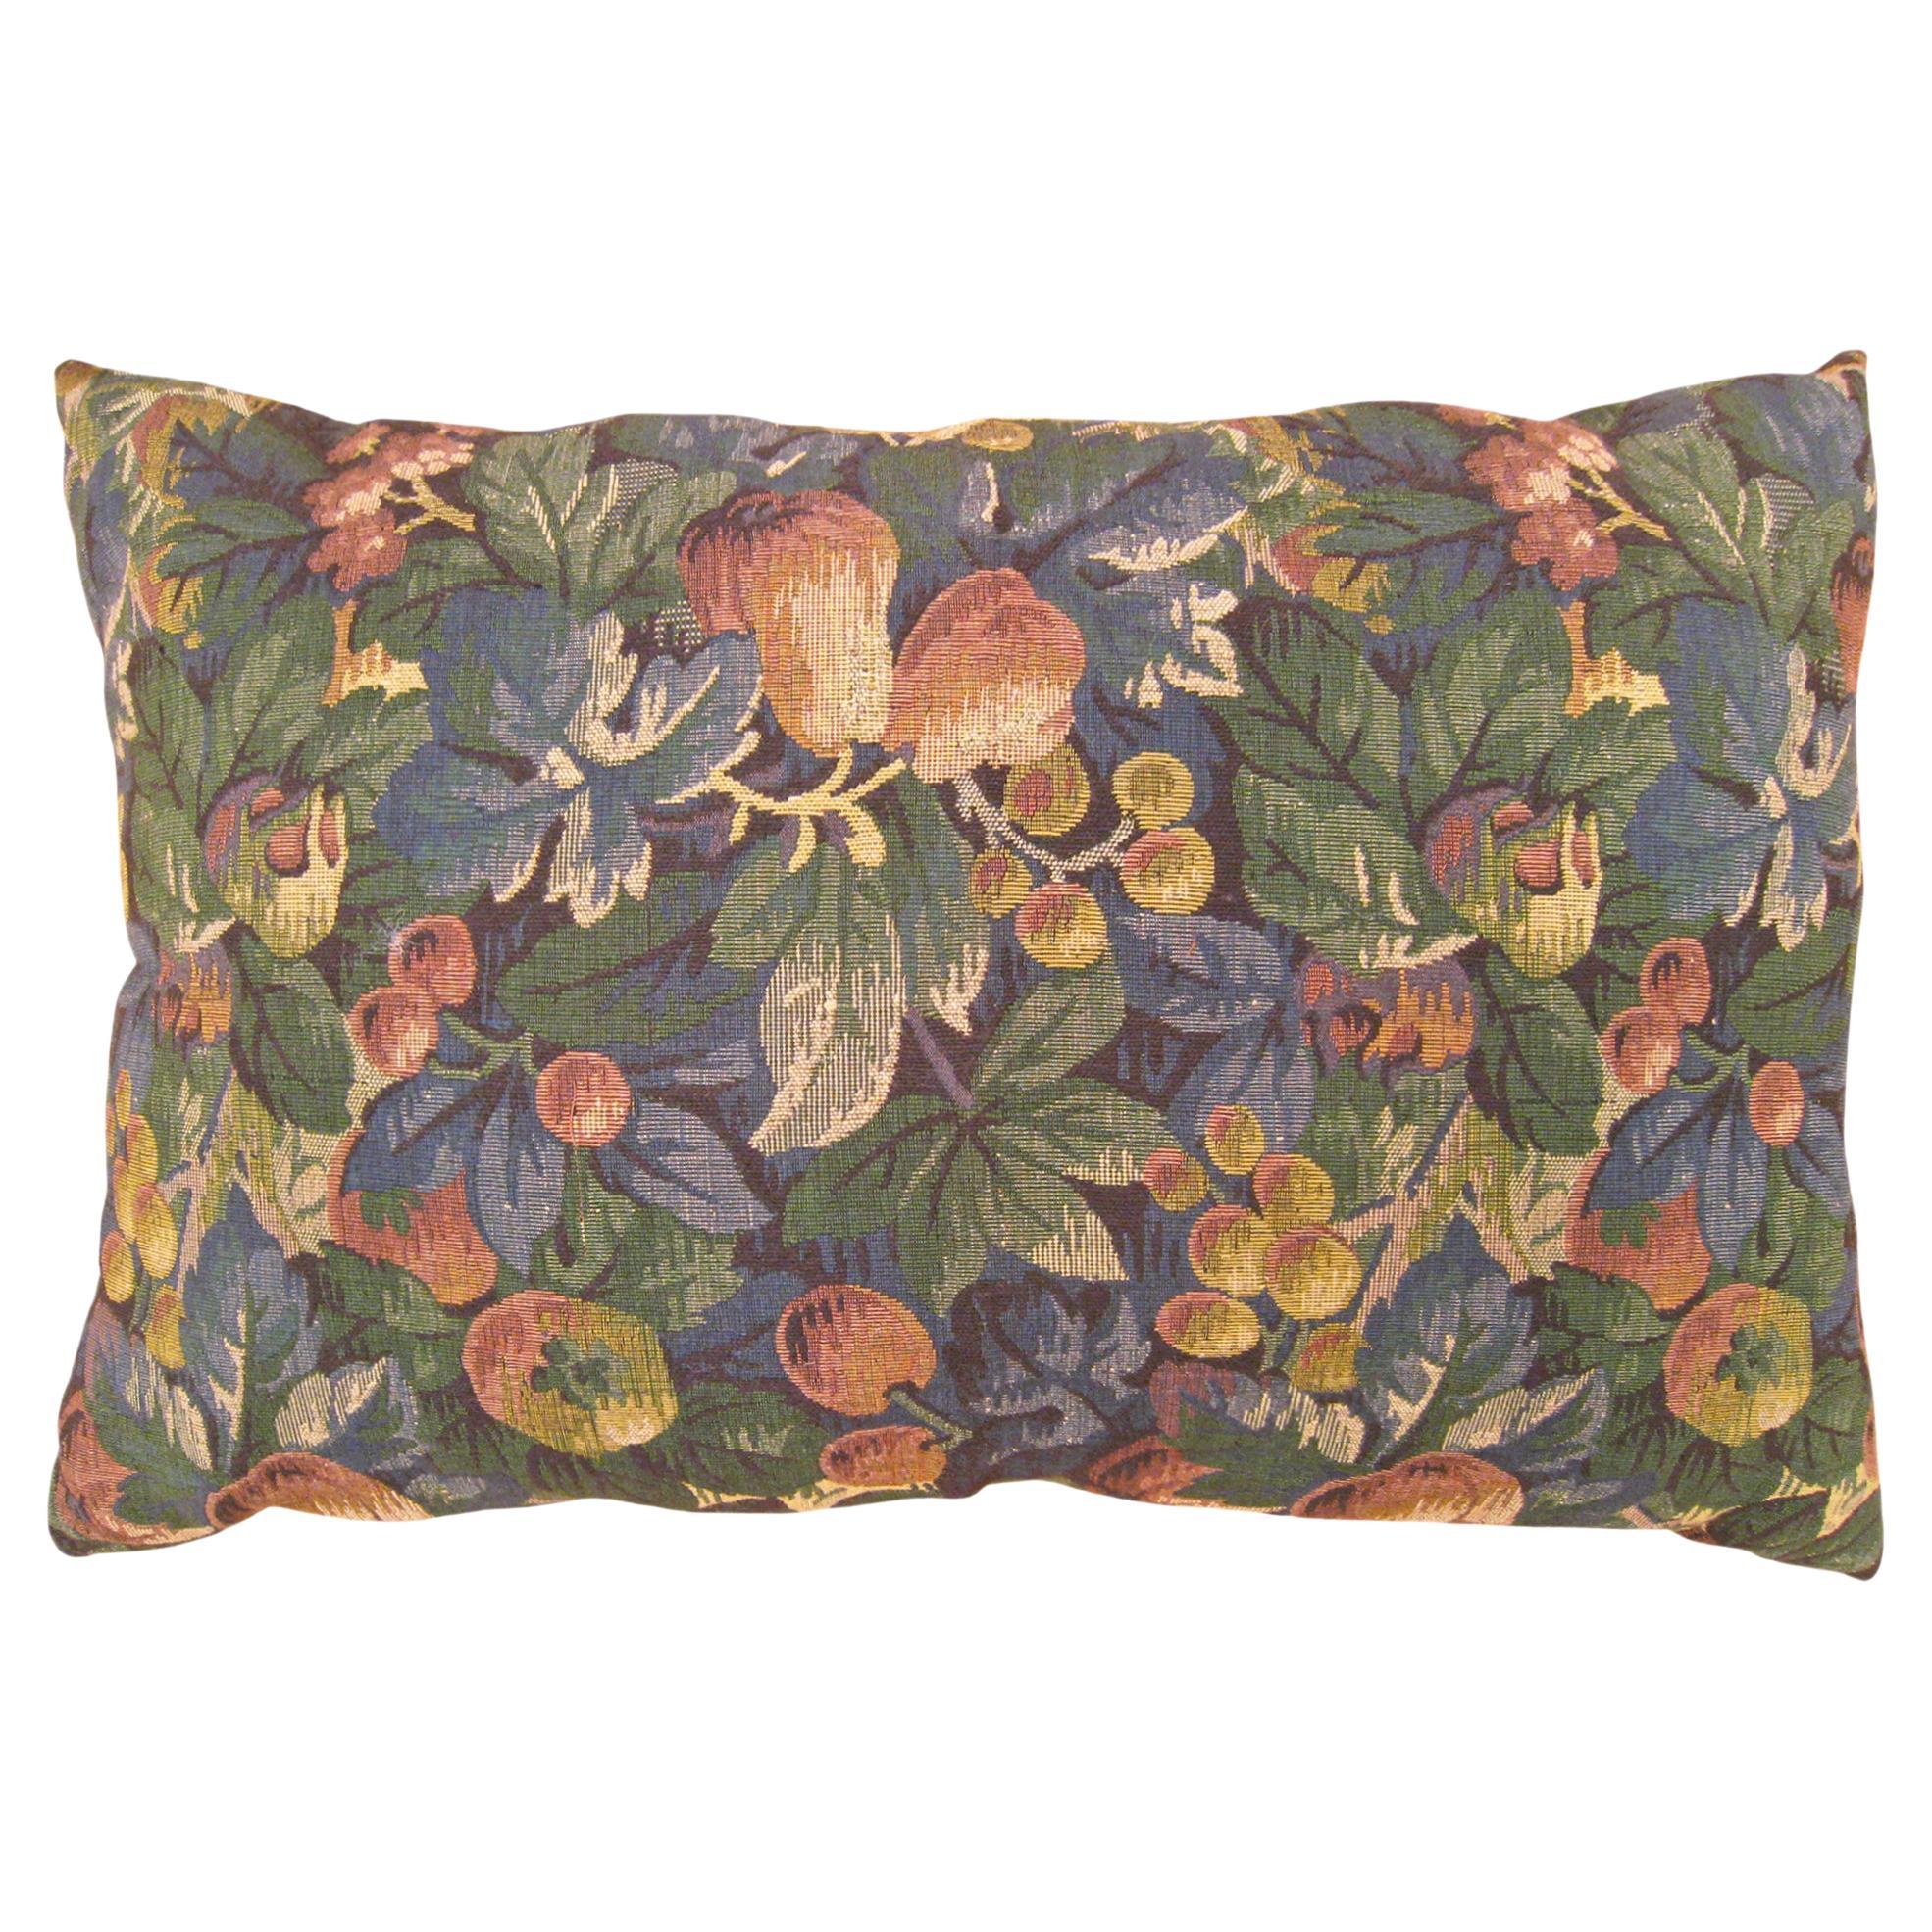 Decorative Antique Jacquard Tapestry Pillow with a Garden Design Allover For Sale